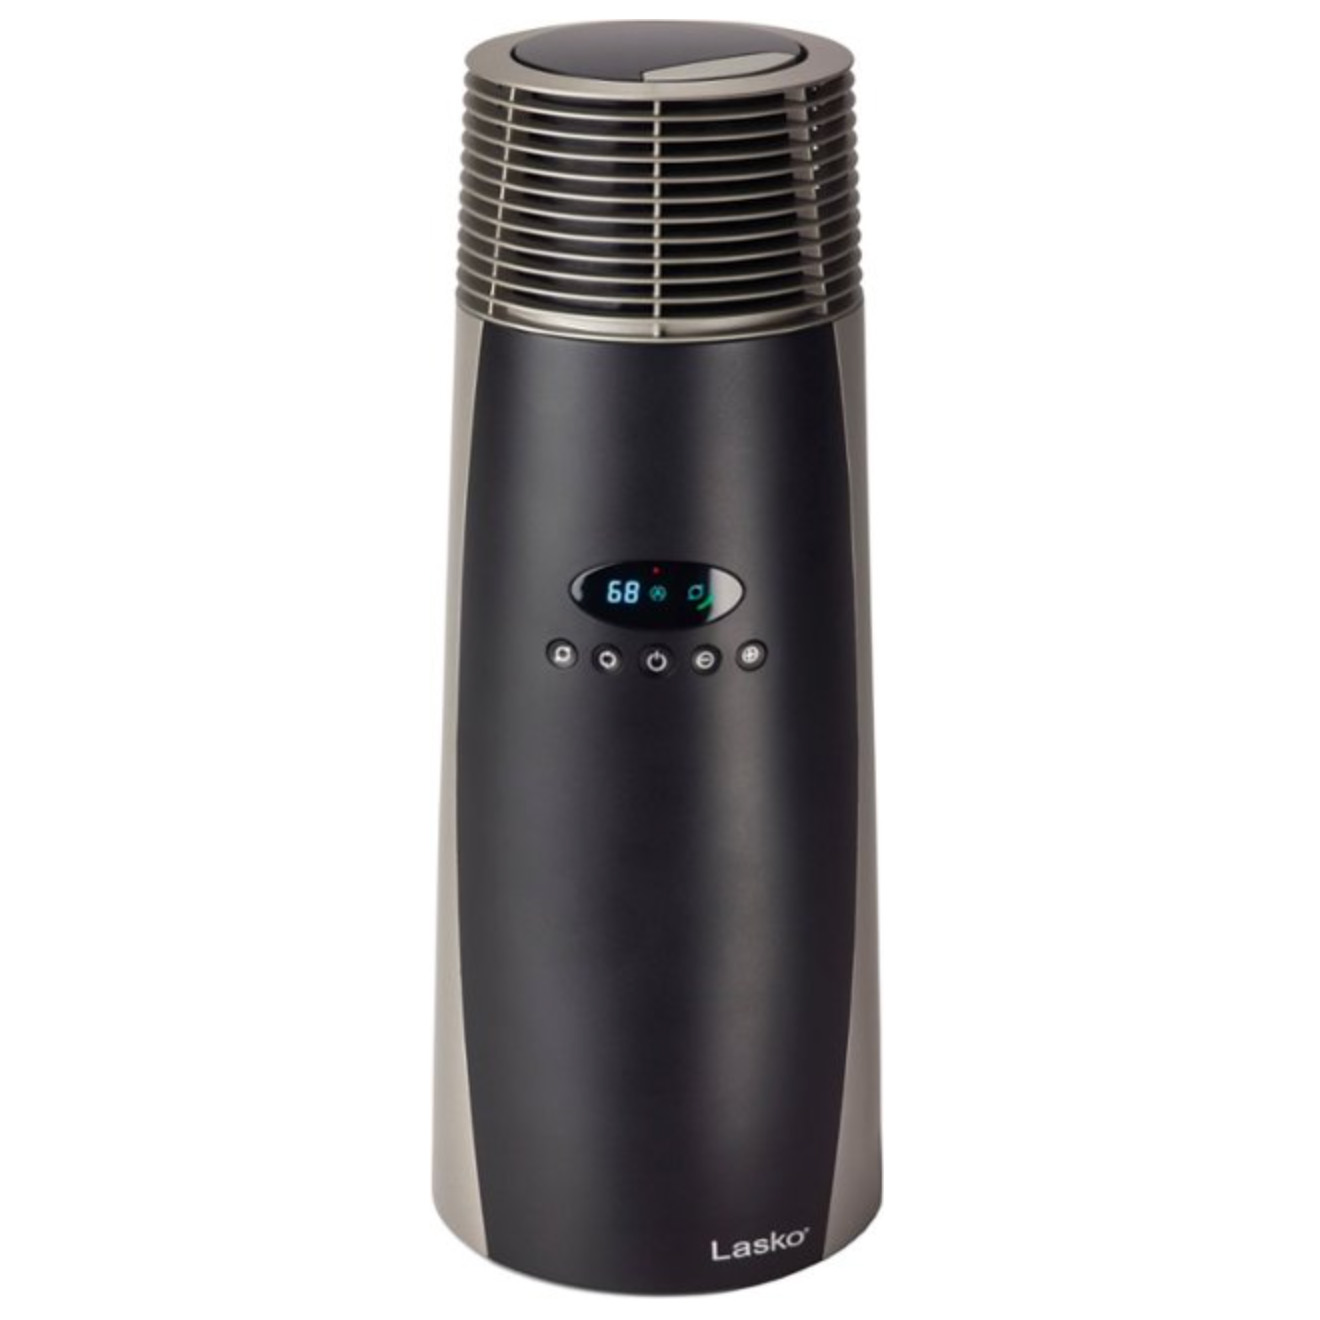 Black and grey cylinder space heater